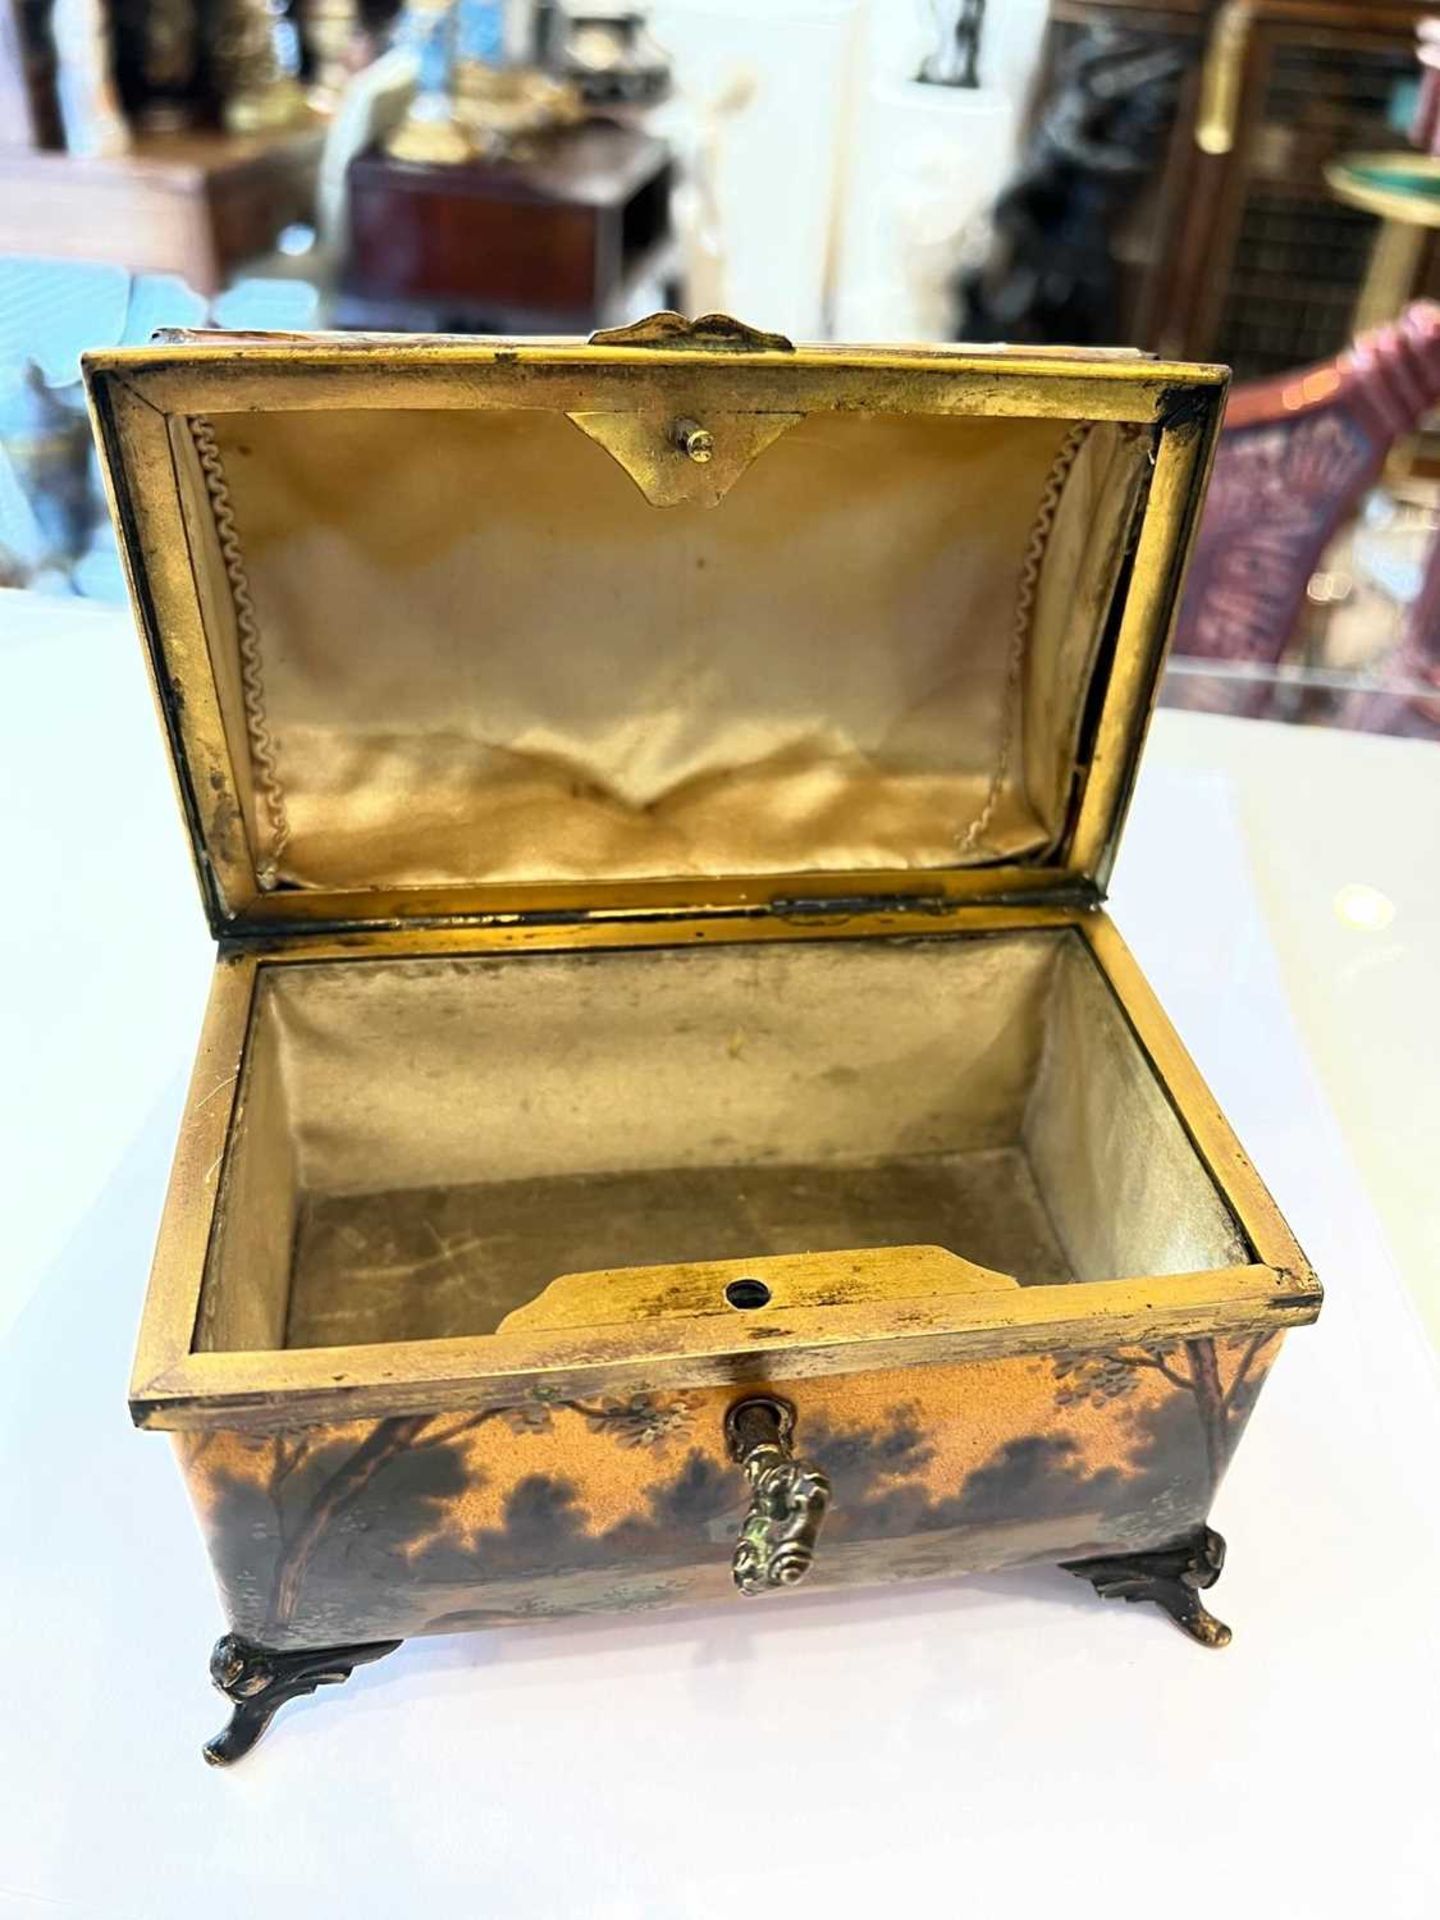 A 19TH CENTURY FRENCH LIMOGES ENAMEL AND ORMOLU JEWELLERY BOX - Image 2 of 7